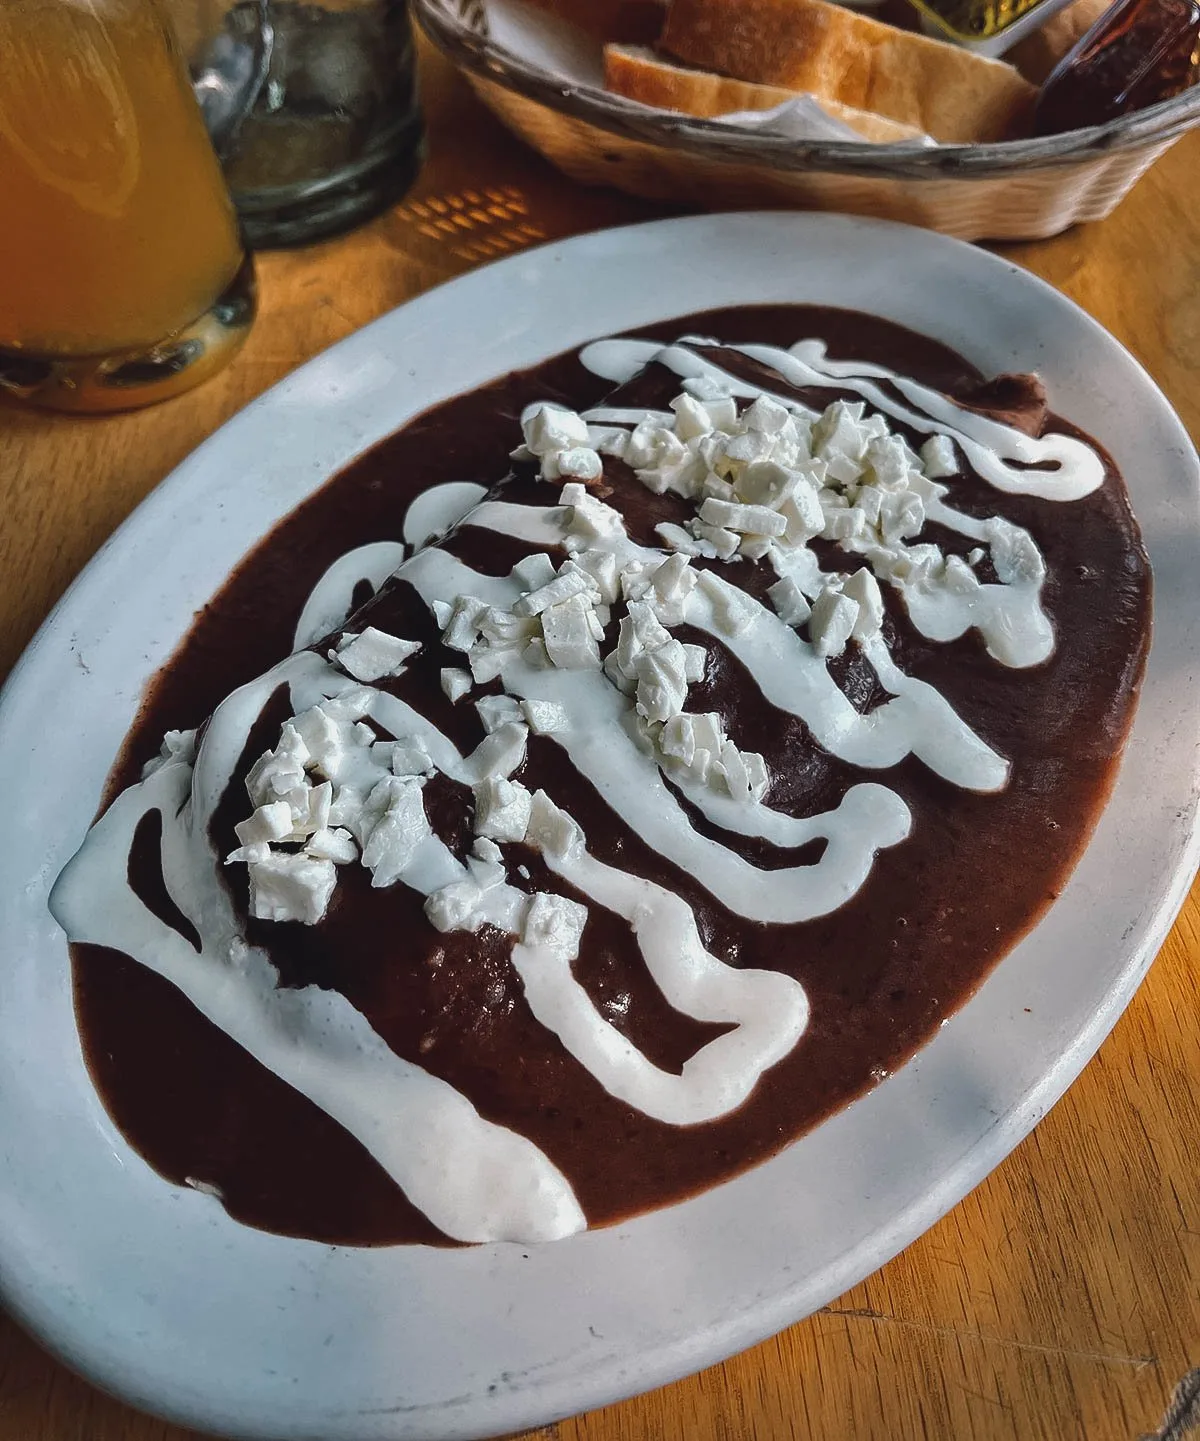 Huitlacoche crepe from a restaurant in Mexico City